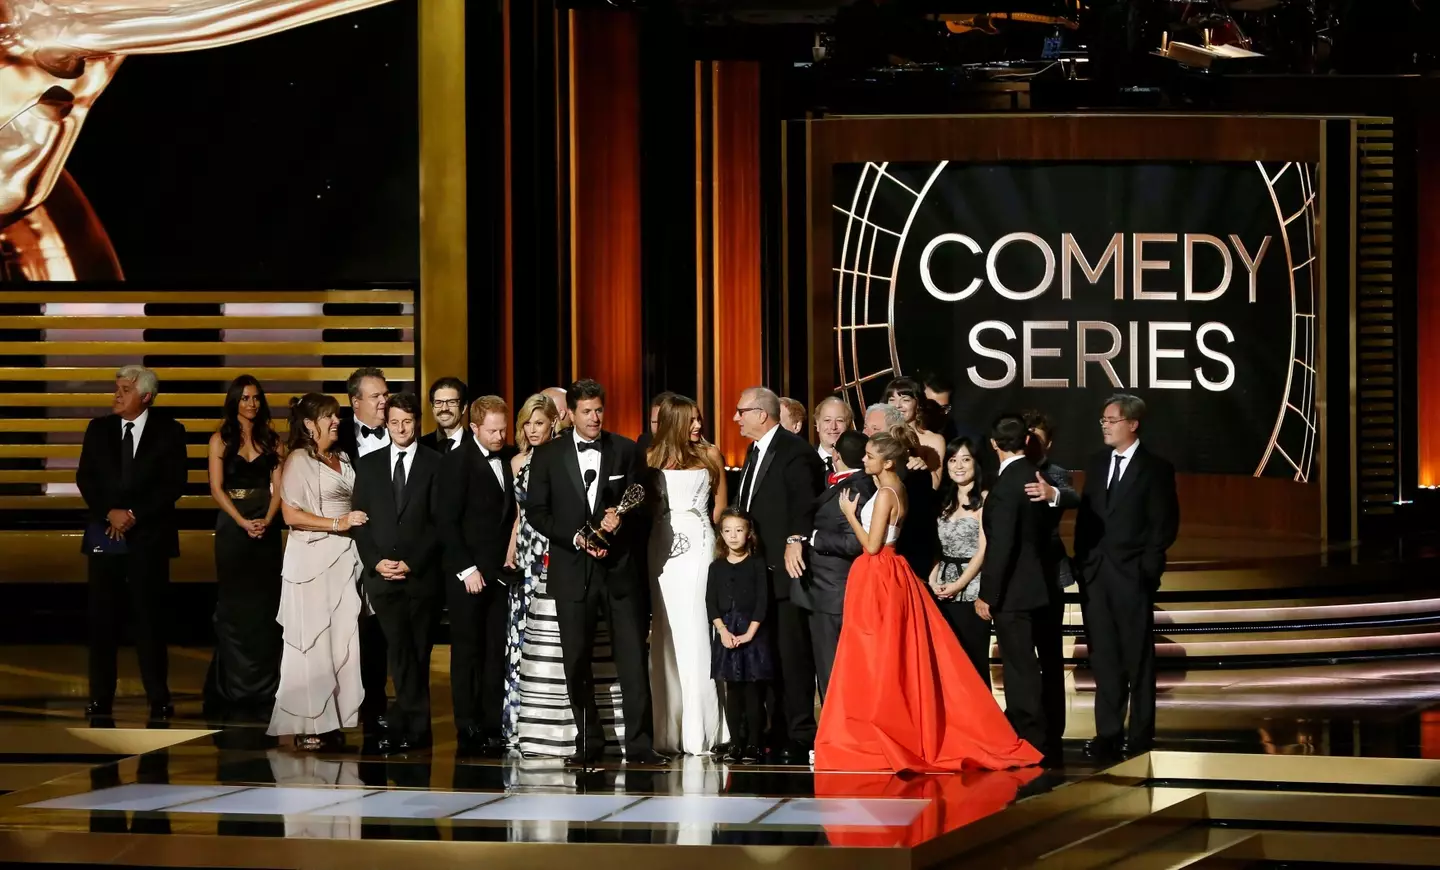 In its heyday Modern Family picked up plenty of awards including several Emmys.